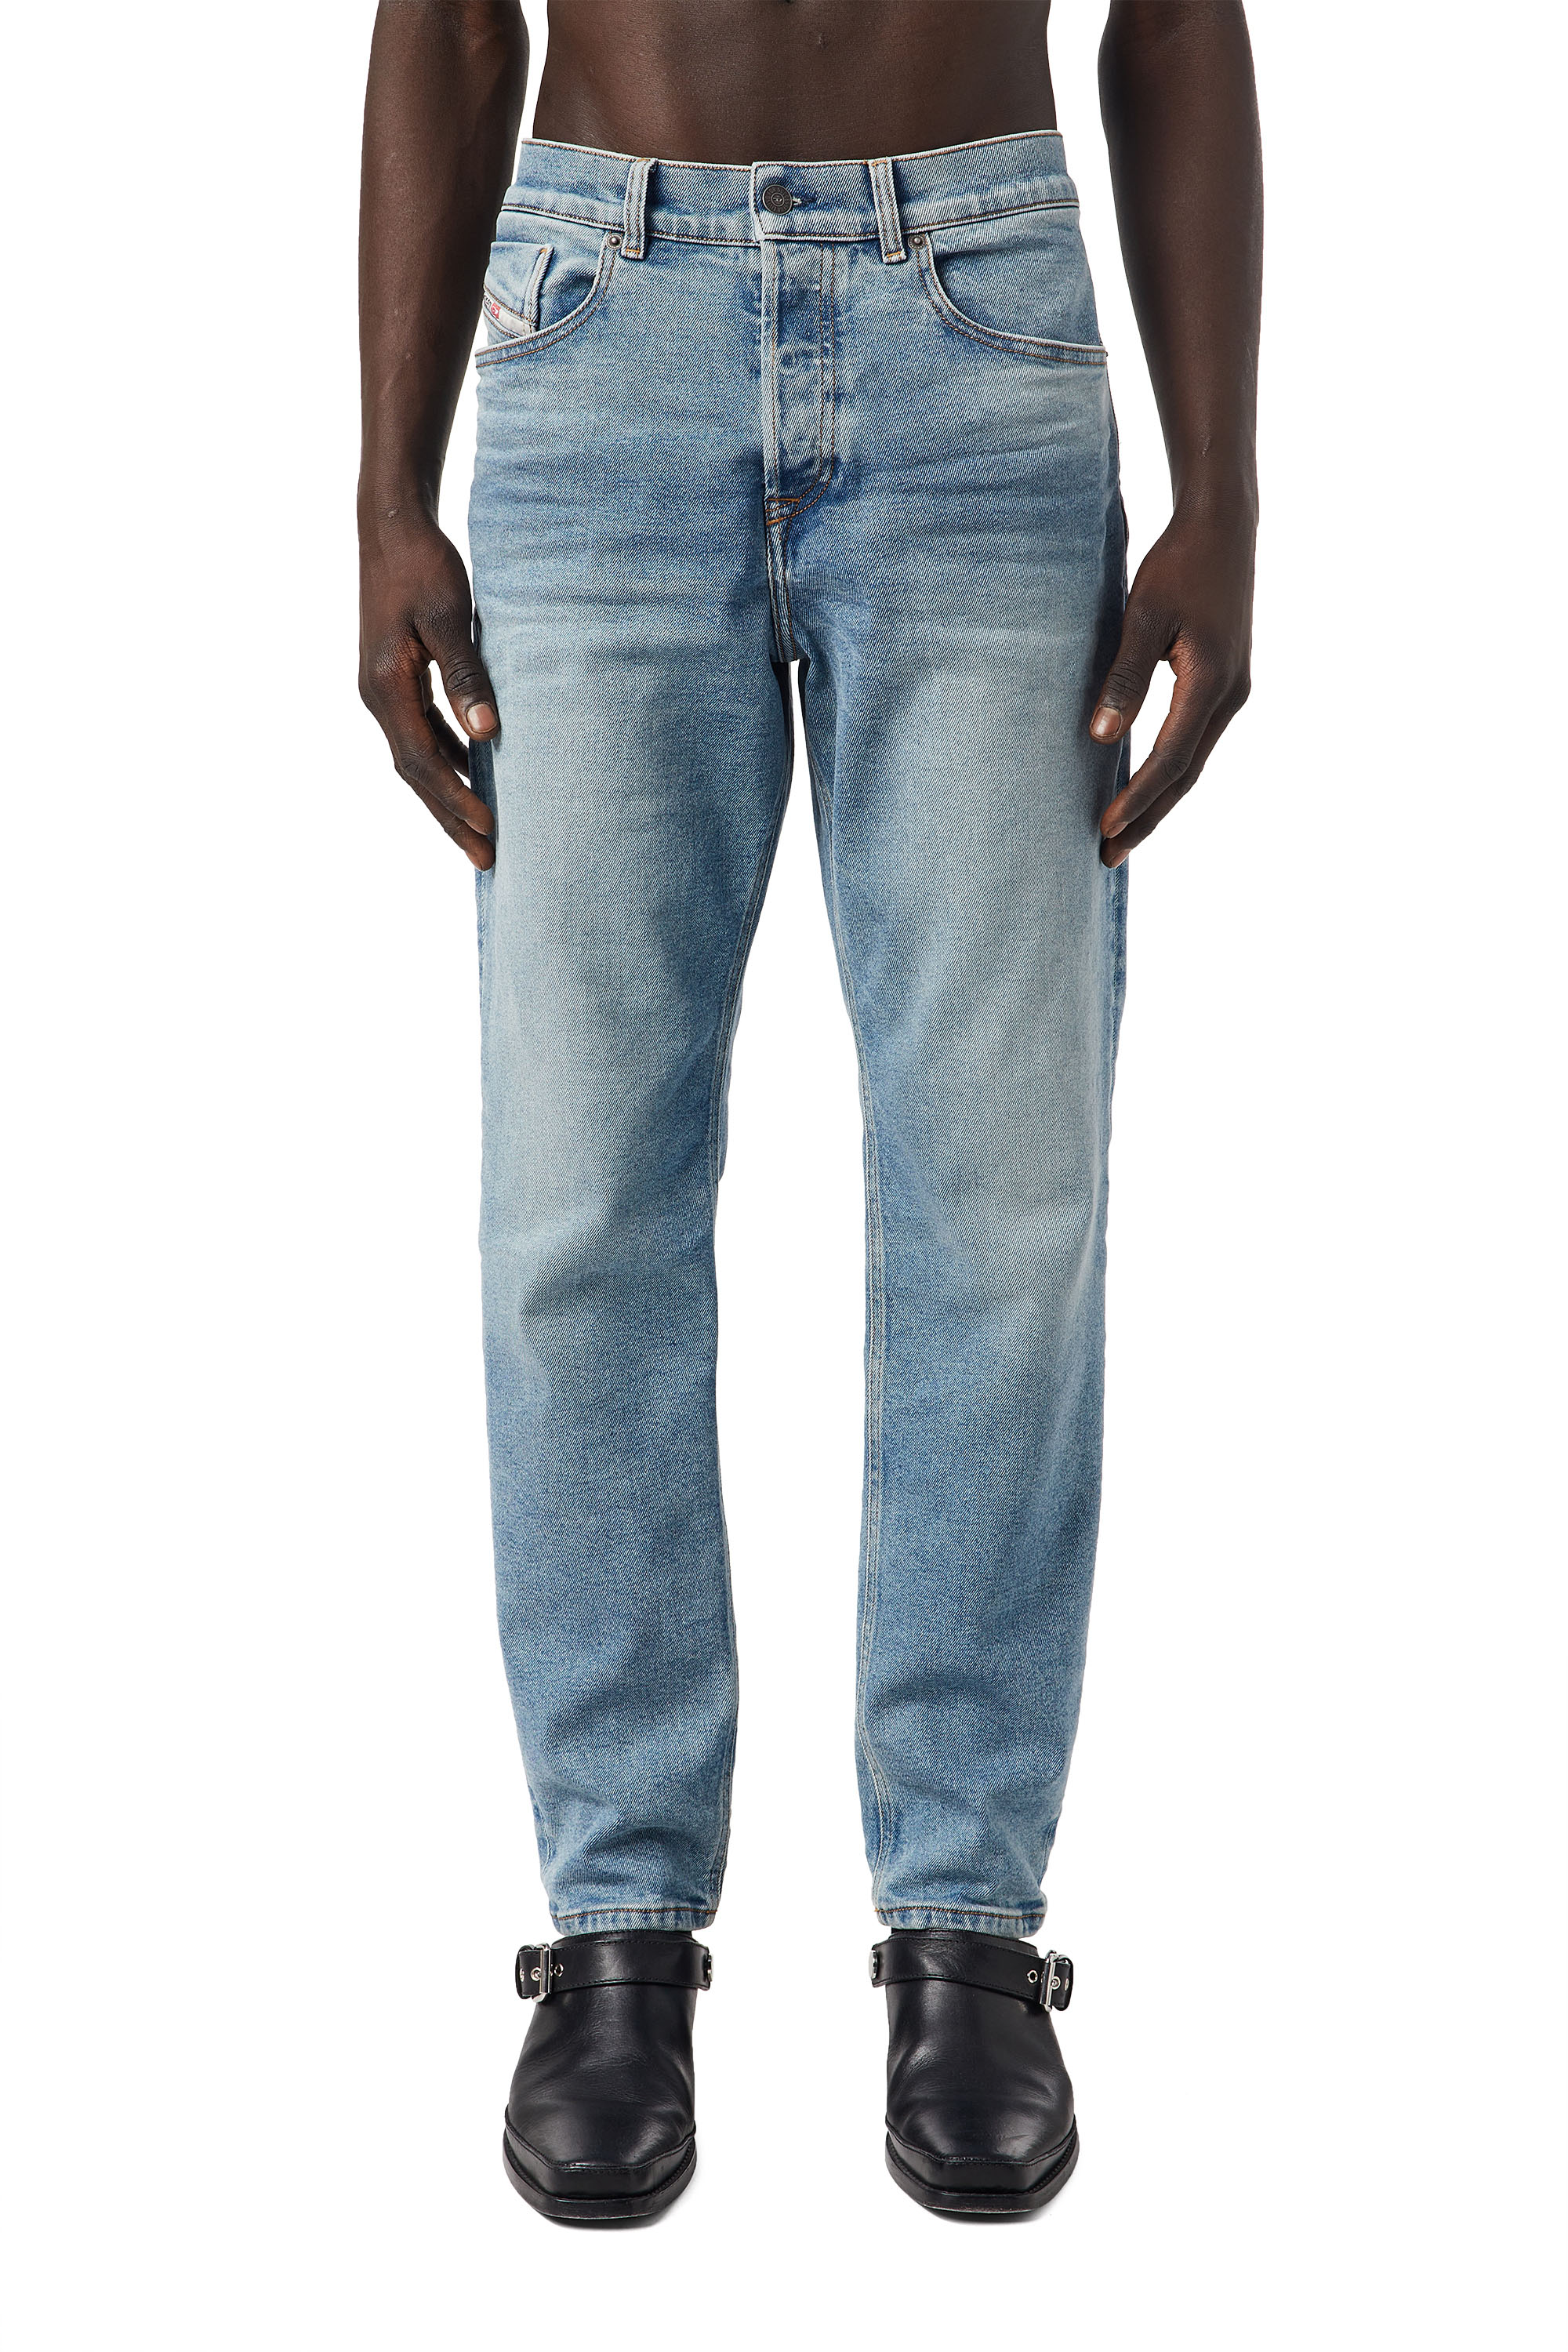 2005 D-FINING 09C77 Tapered Jeans, Light Blue - Jeans